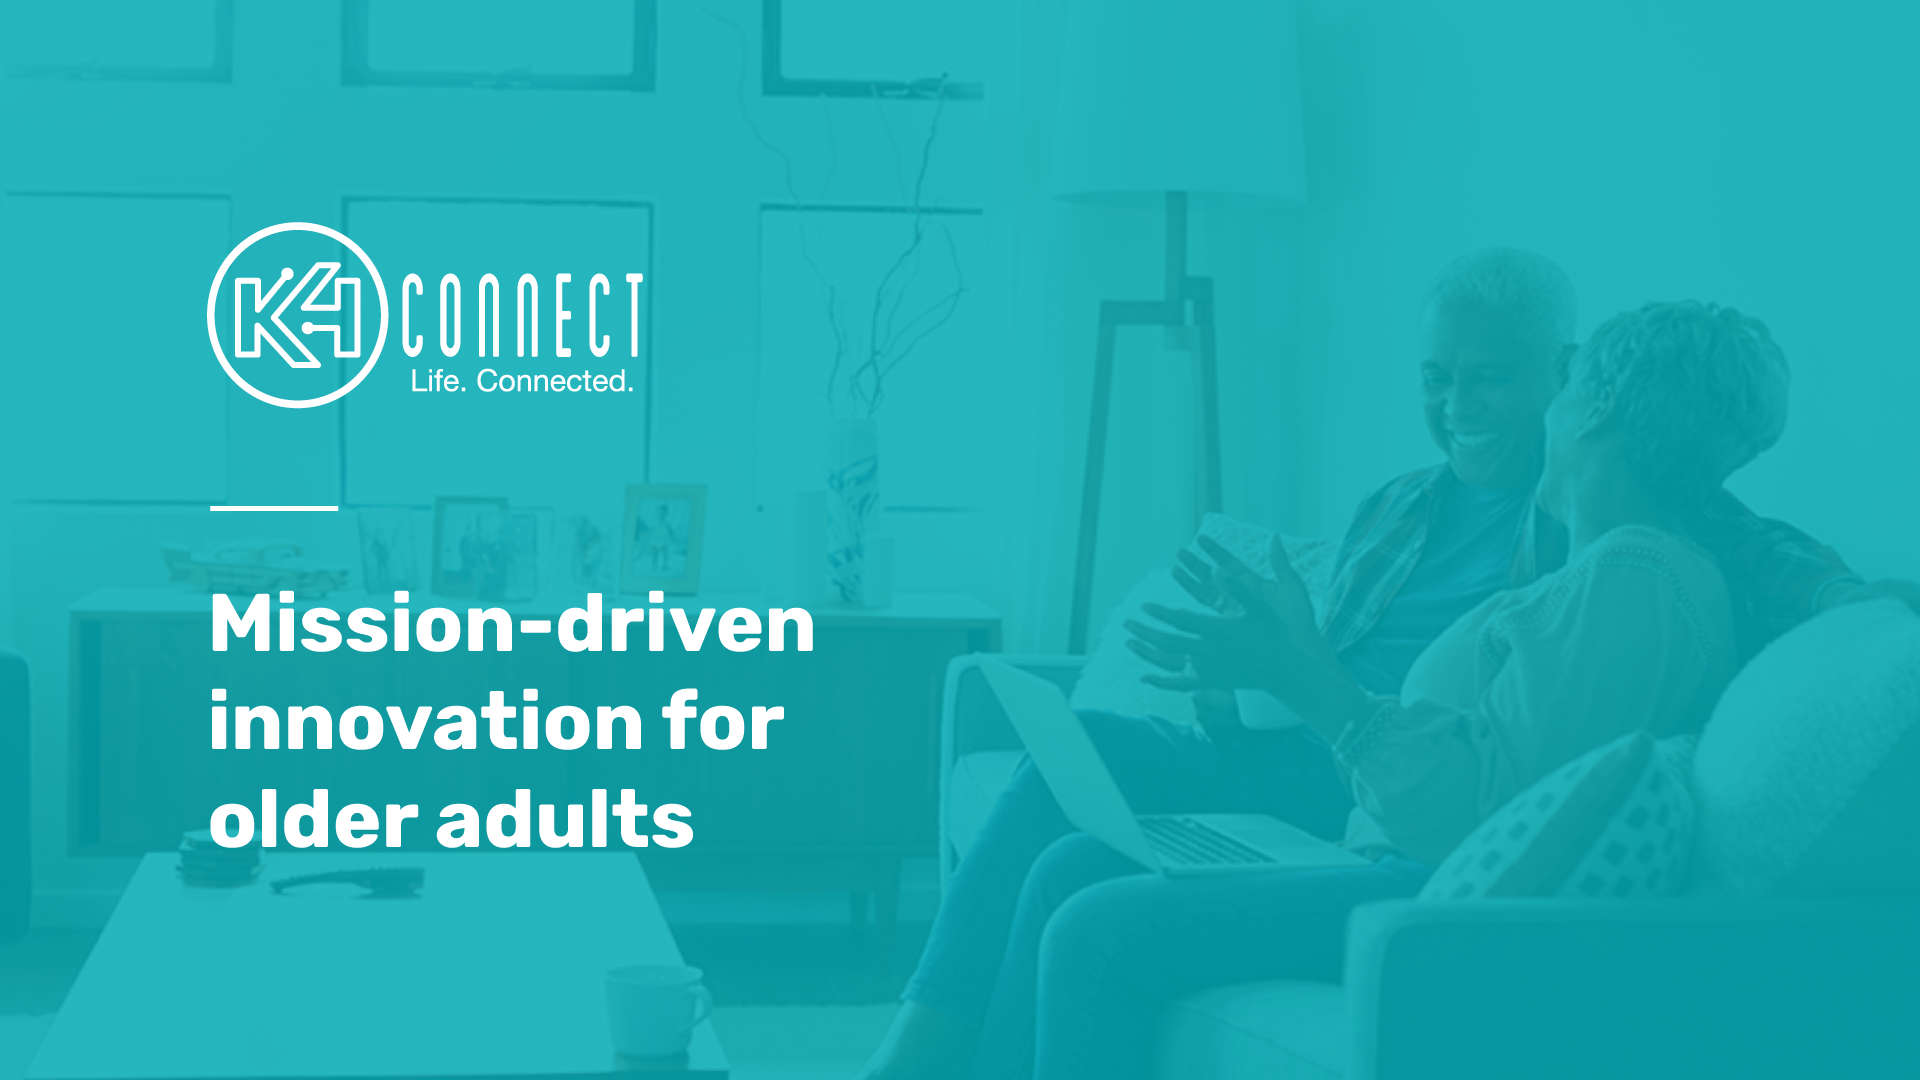 K4Connect Raises $8.9M to Expand Tech Accessibility for Senior Living